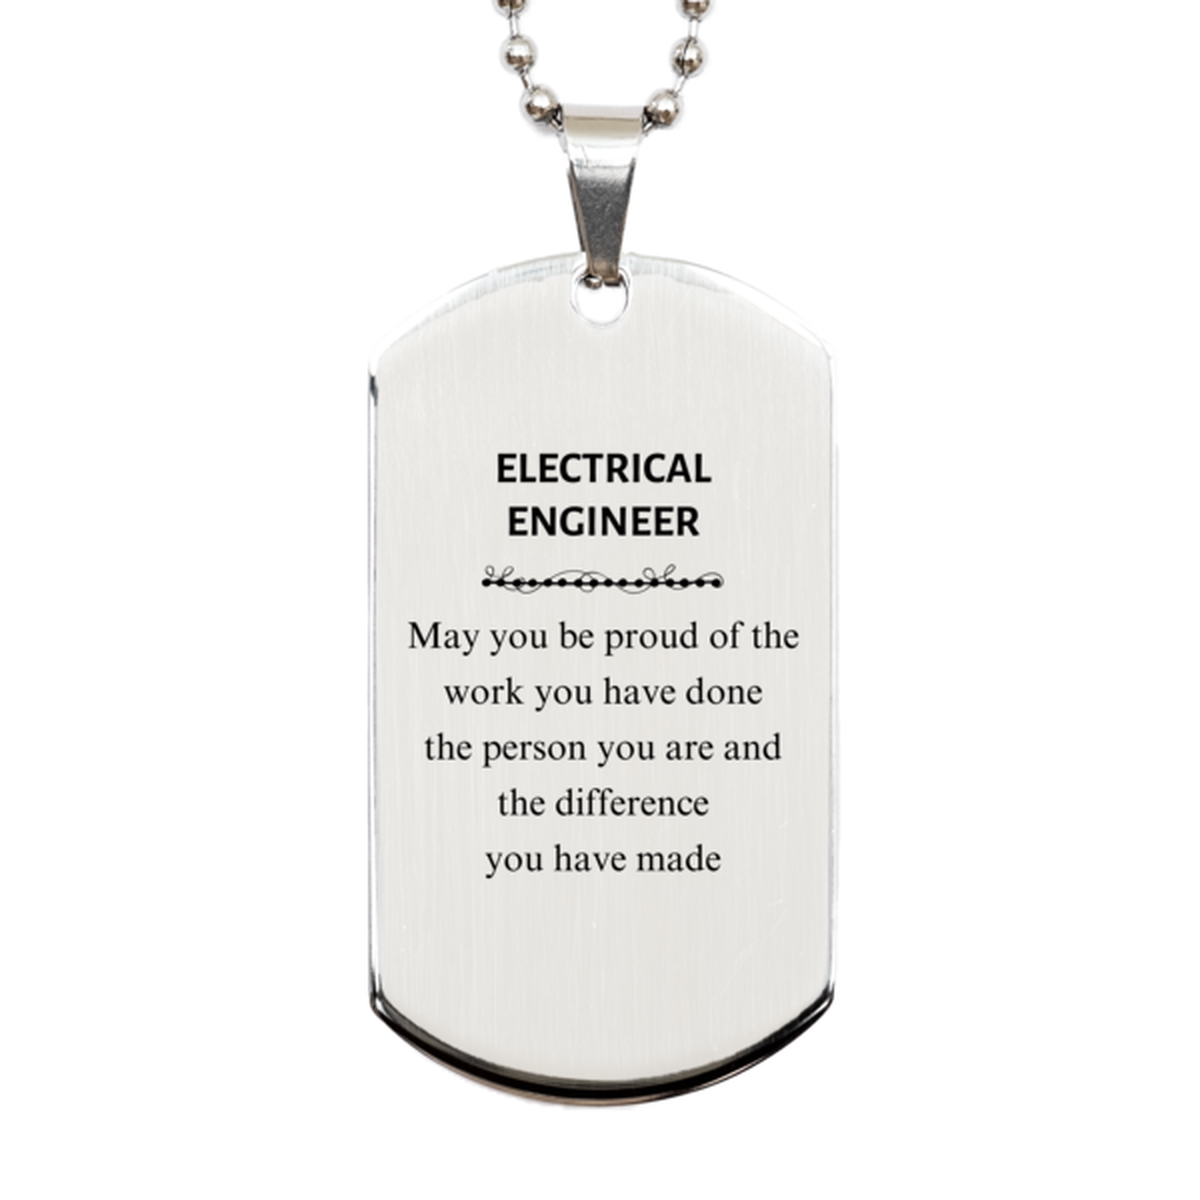 Electrical Engineer May you be proud of the work you have done, Retirement Electrical Engineer Silver Dog Tag for Colleague Appreciation Gifts Amazing for Electrical Engineer